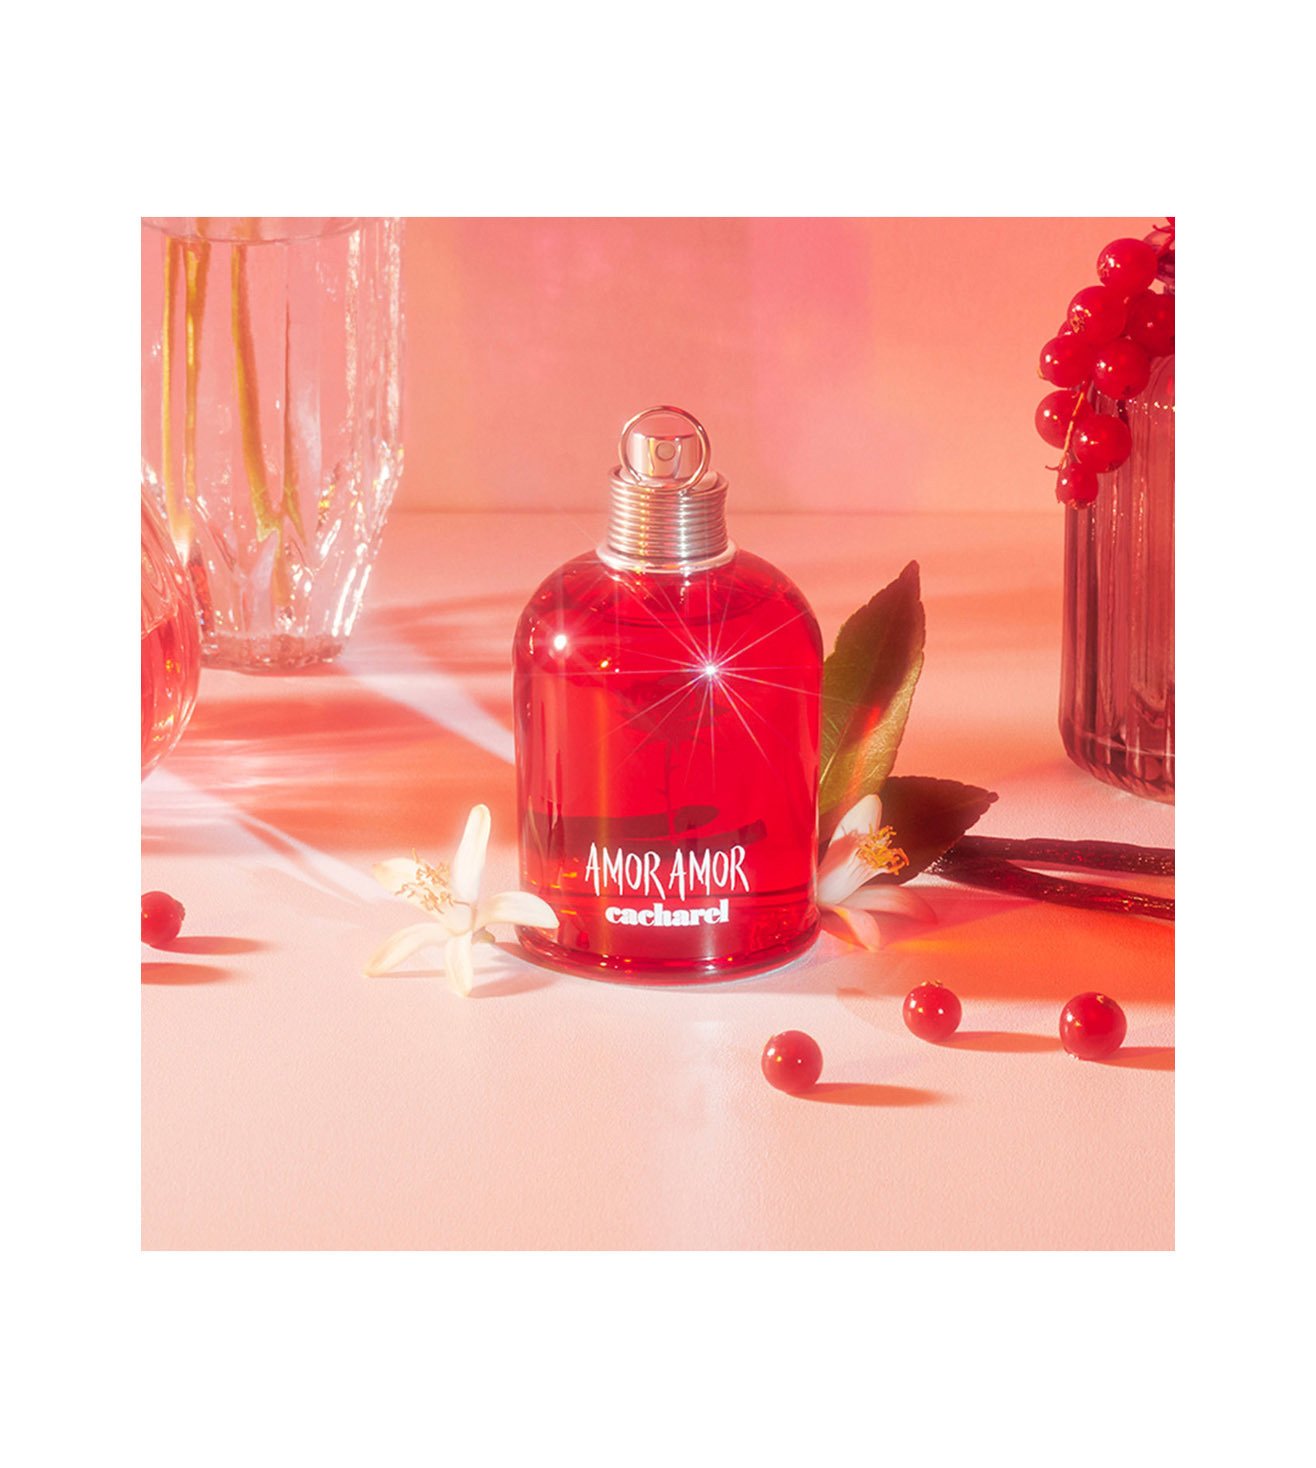 Amor Amor by Cacharel is a Floral Fruity fragrance for women that can ... |  TikTok